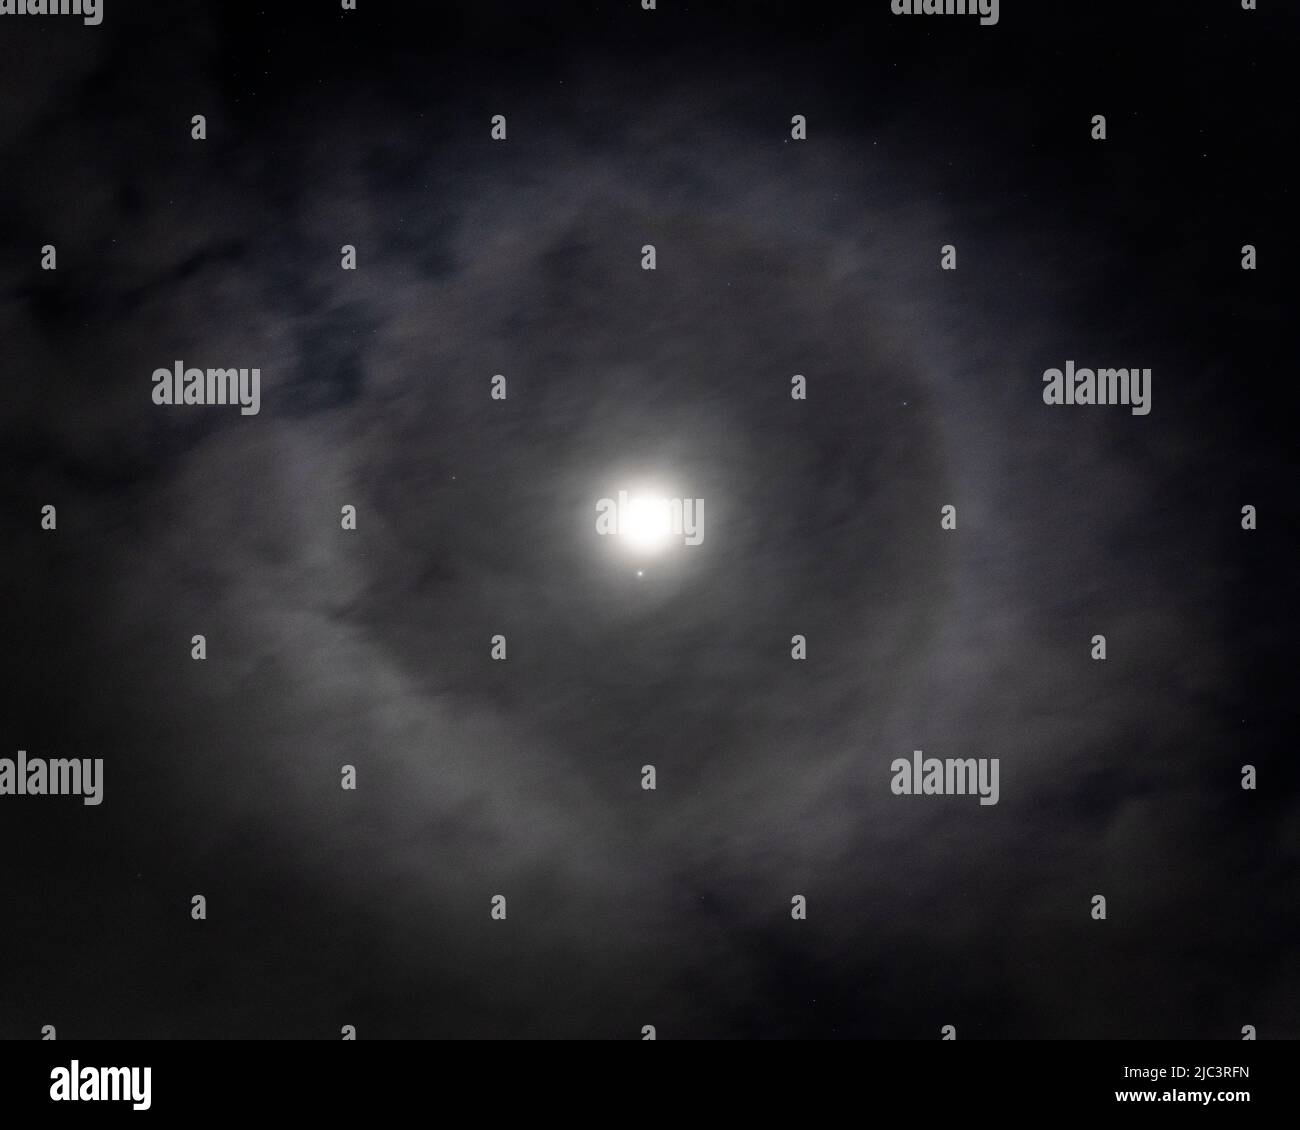 Lunar halo ring around the moon in night time sky with stars Stock Photo